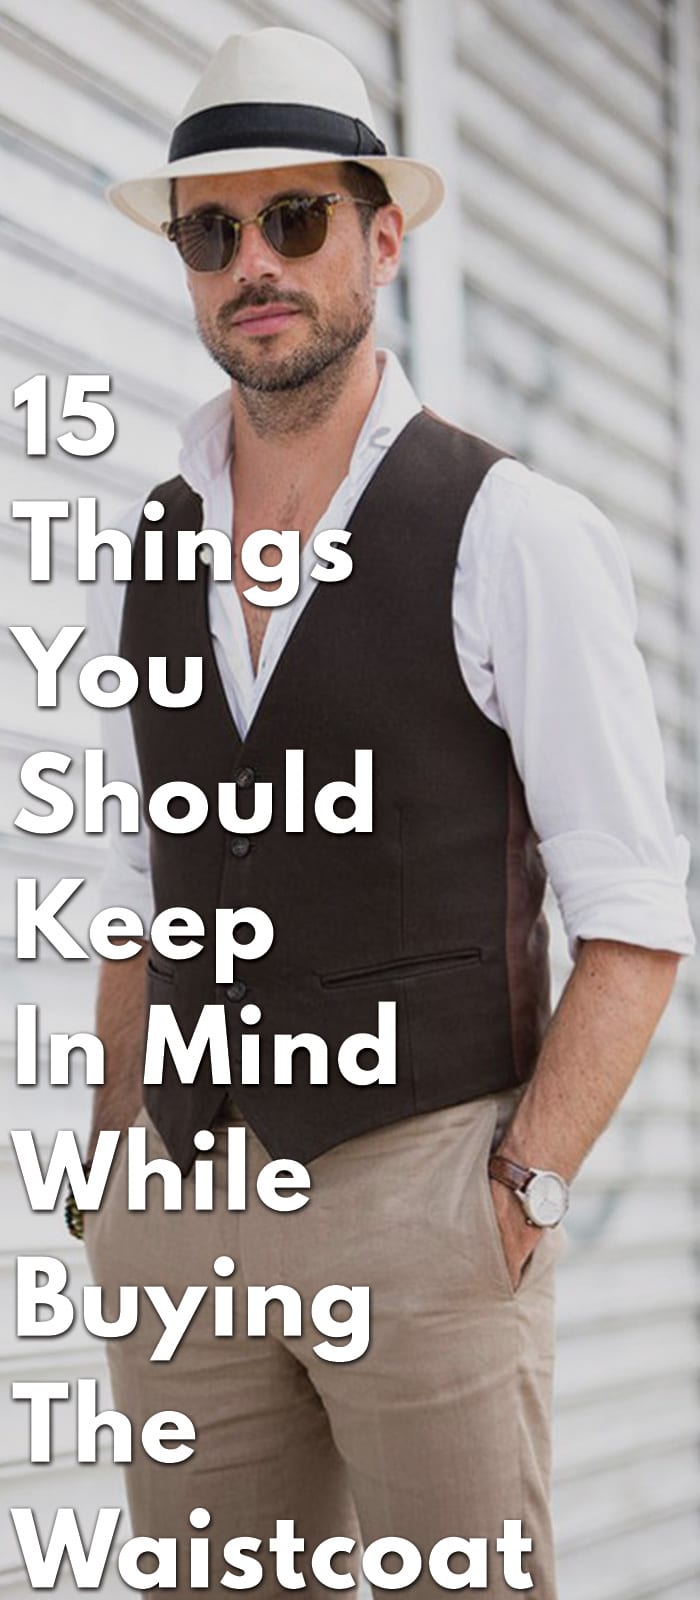 15-Things-You-Should-Keep-In-Mind-While-Buying-The-Waistcoat